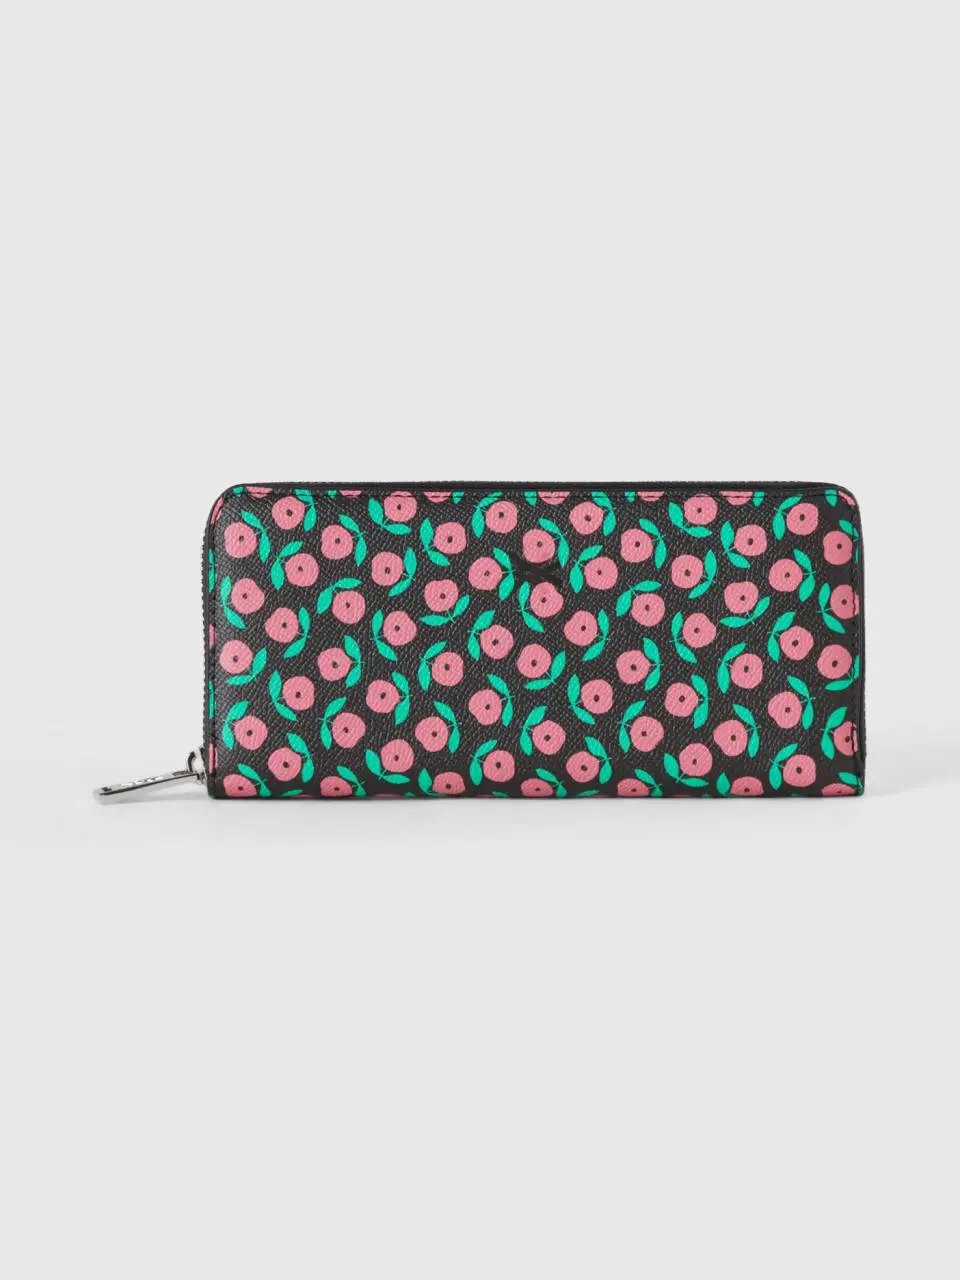 Benetton black wallet with pink flowers. 1